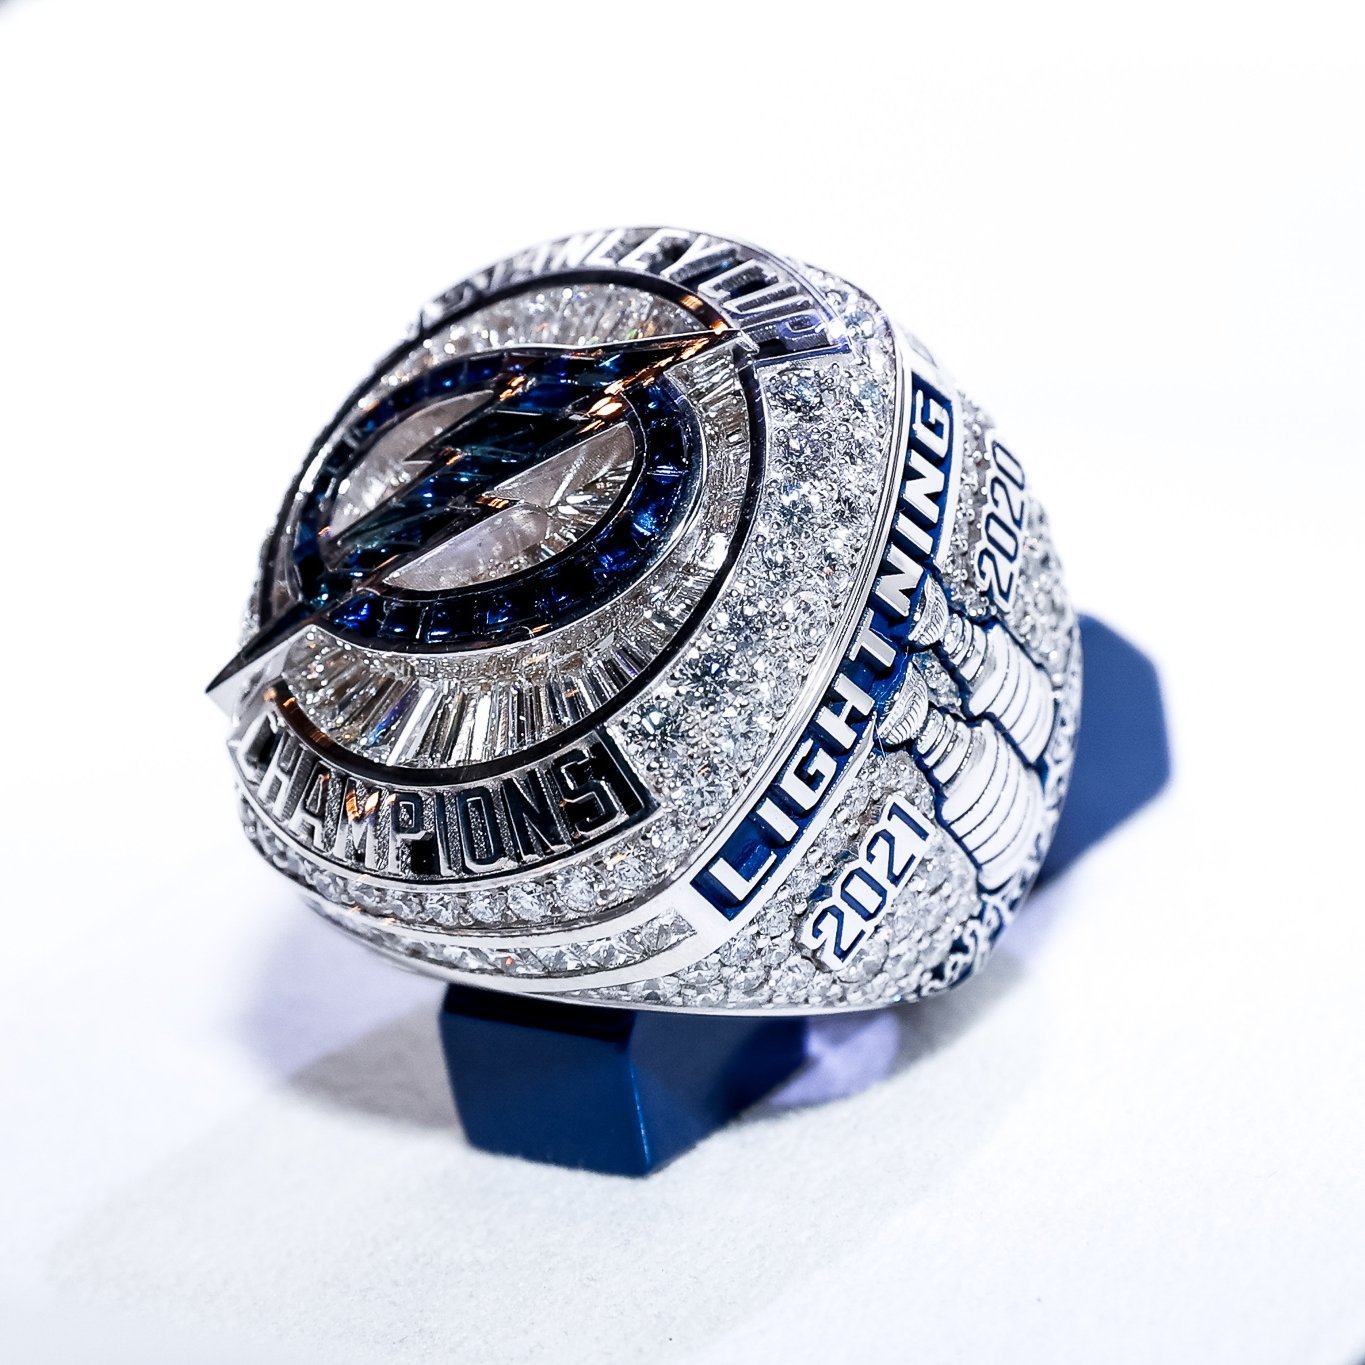 Tampa Bay Lightning Unveil New Stanley Cup Championship Rings